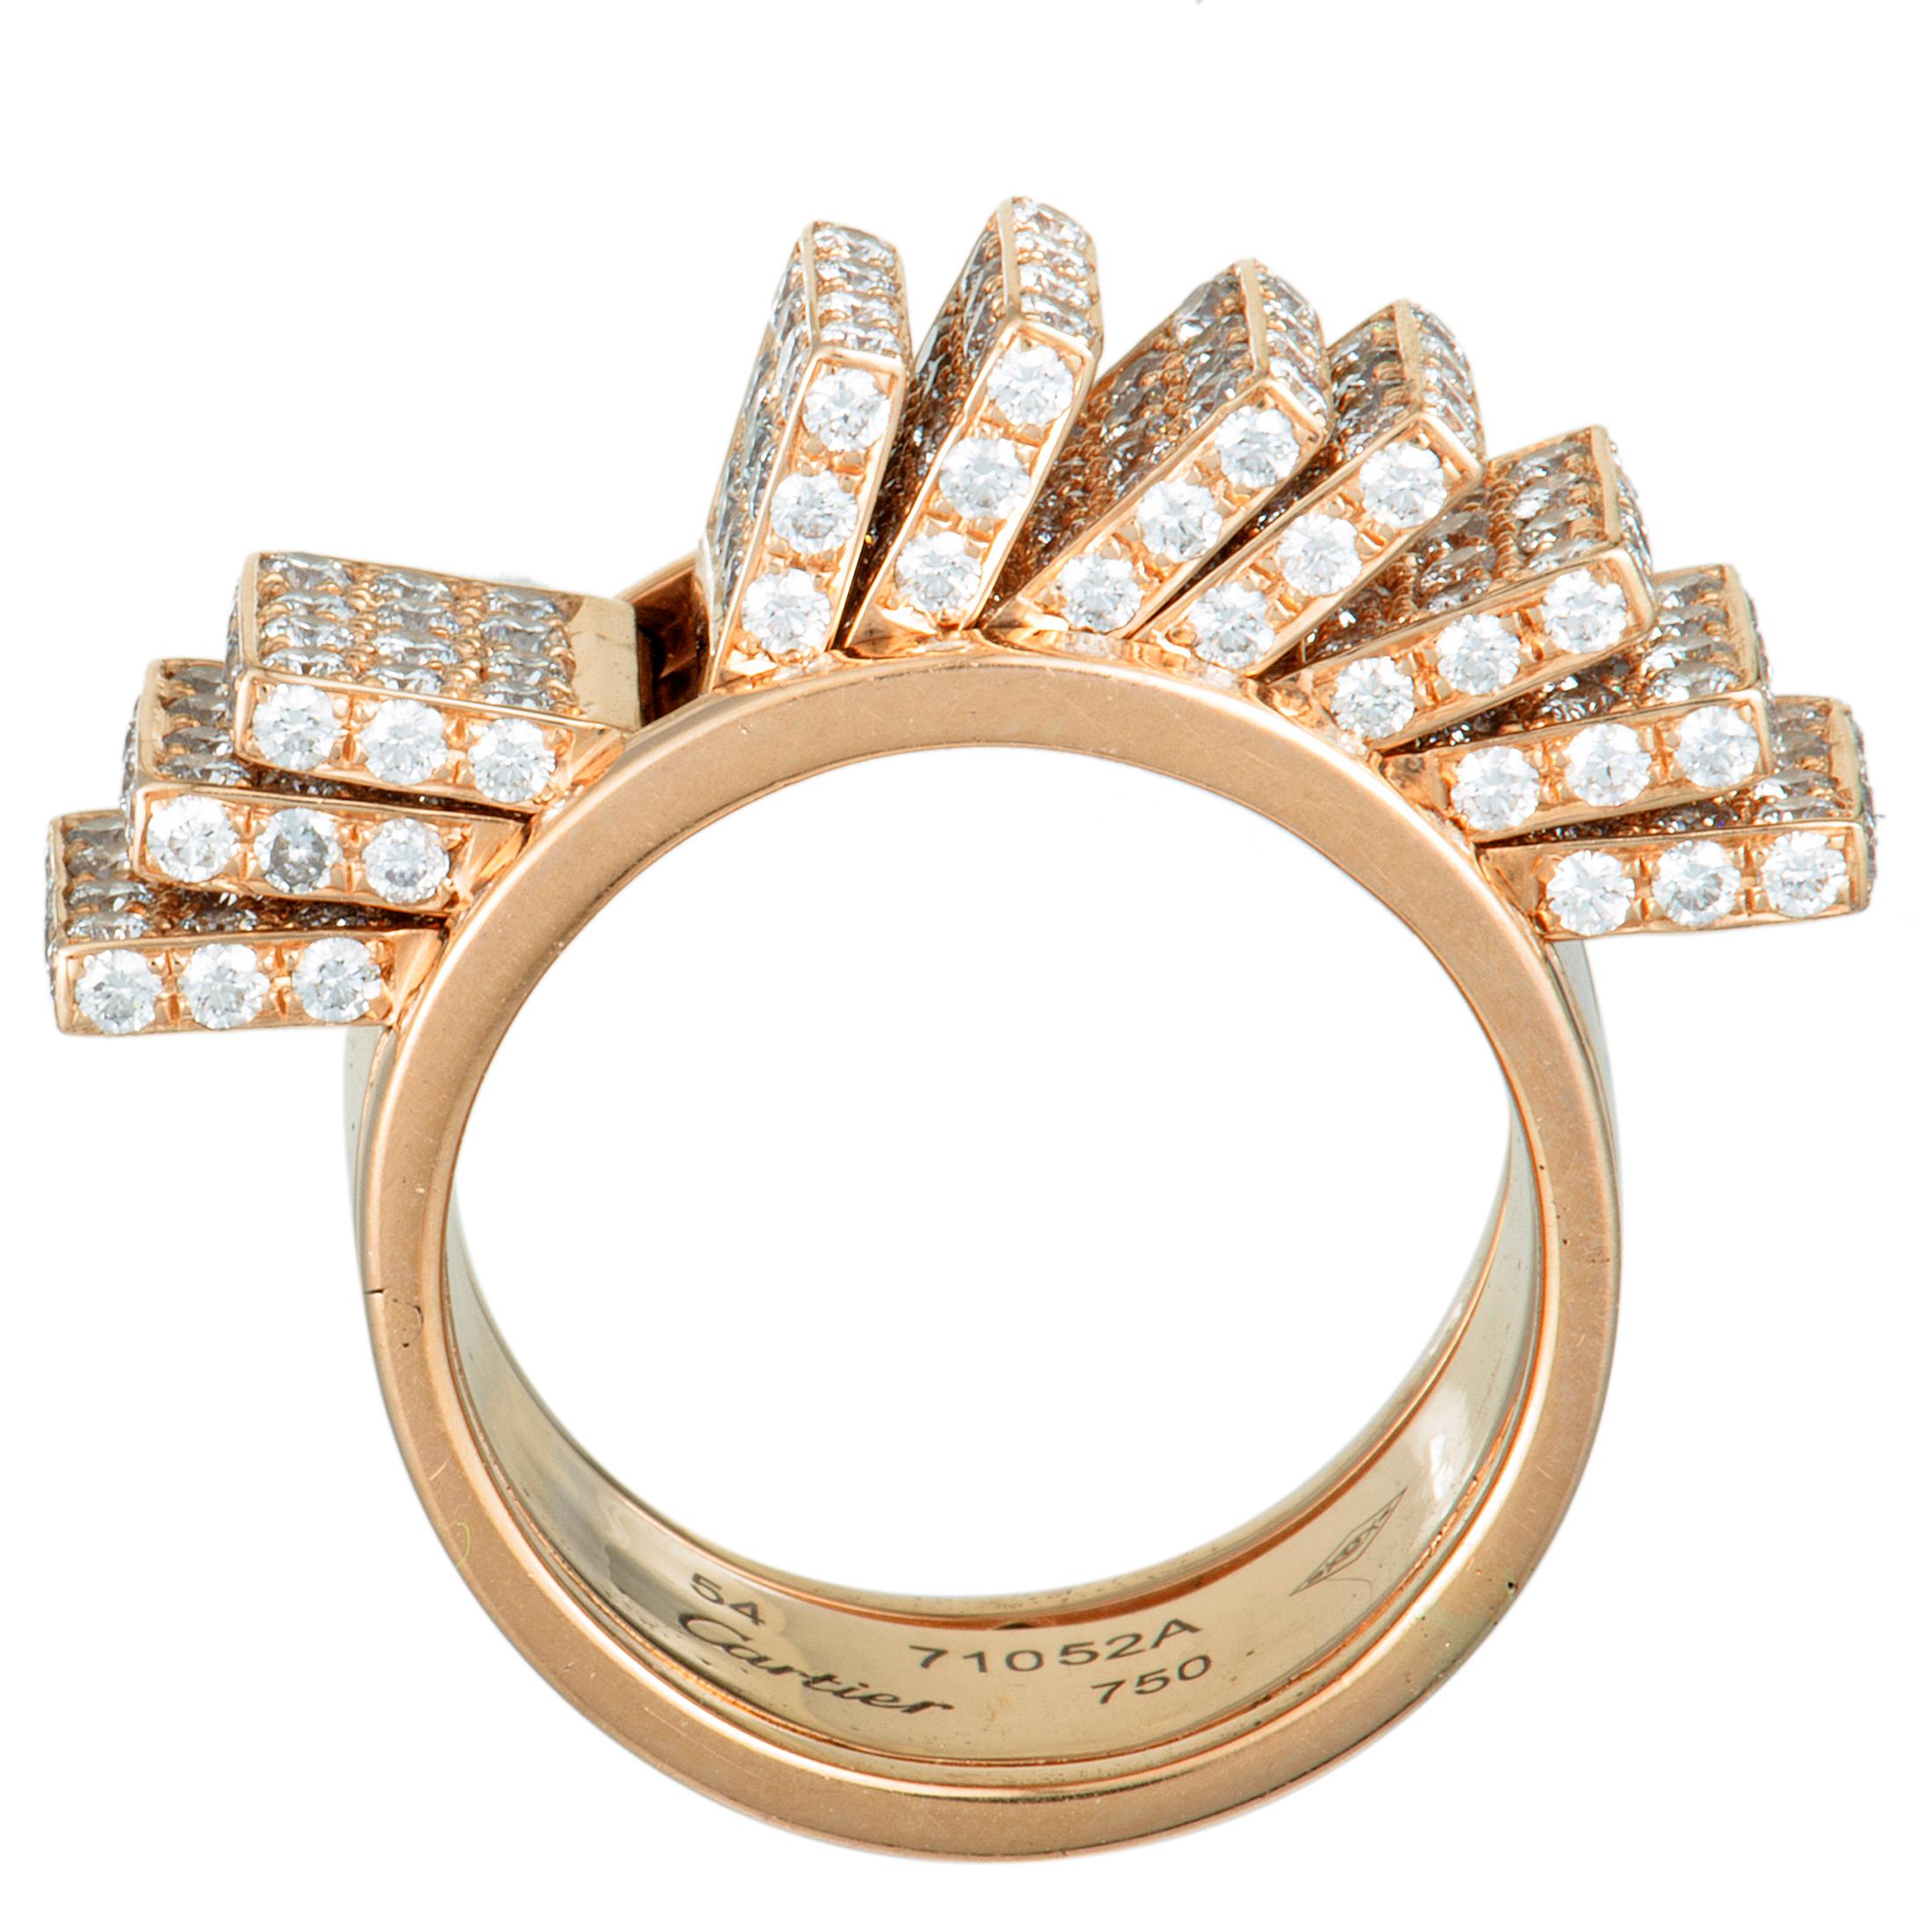 Designed in an enticingly imaginative fashion and lavishly decorated with a plethora of scintillating diamonds, this fascinating Cartier ring will accentuate your ensembles in an incredibly attractive manner. The ring is beautifully made of 18K rose